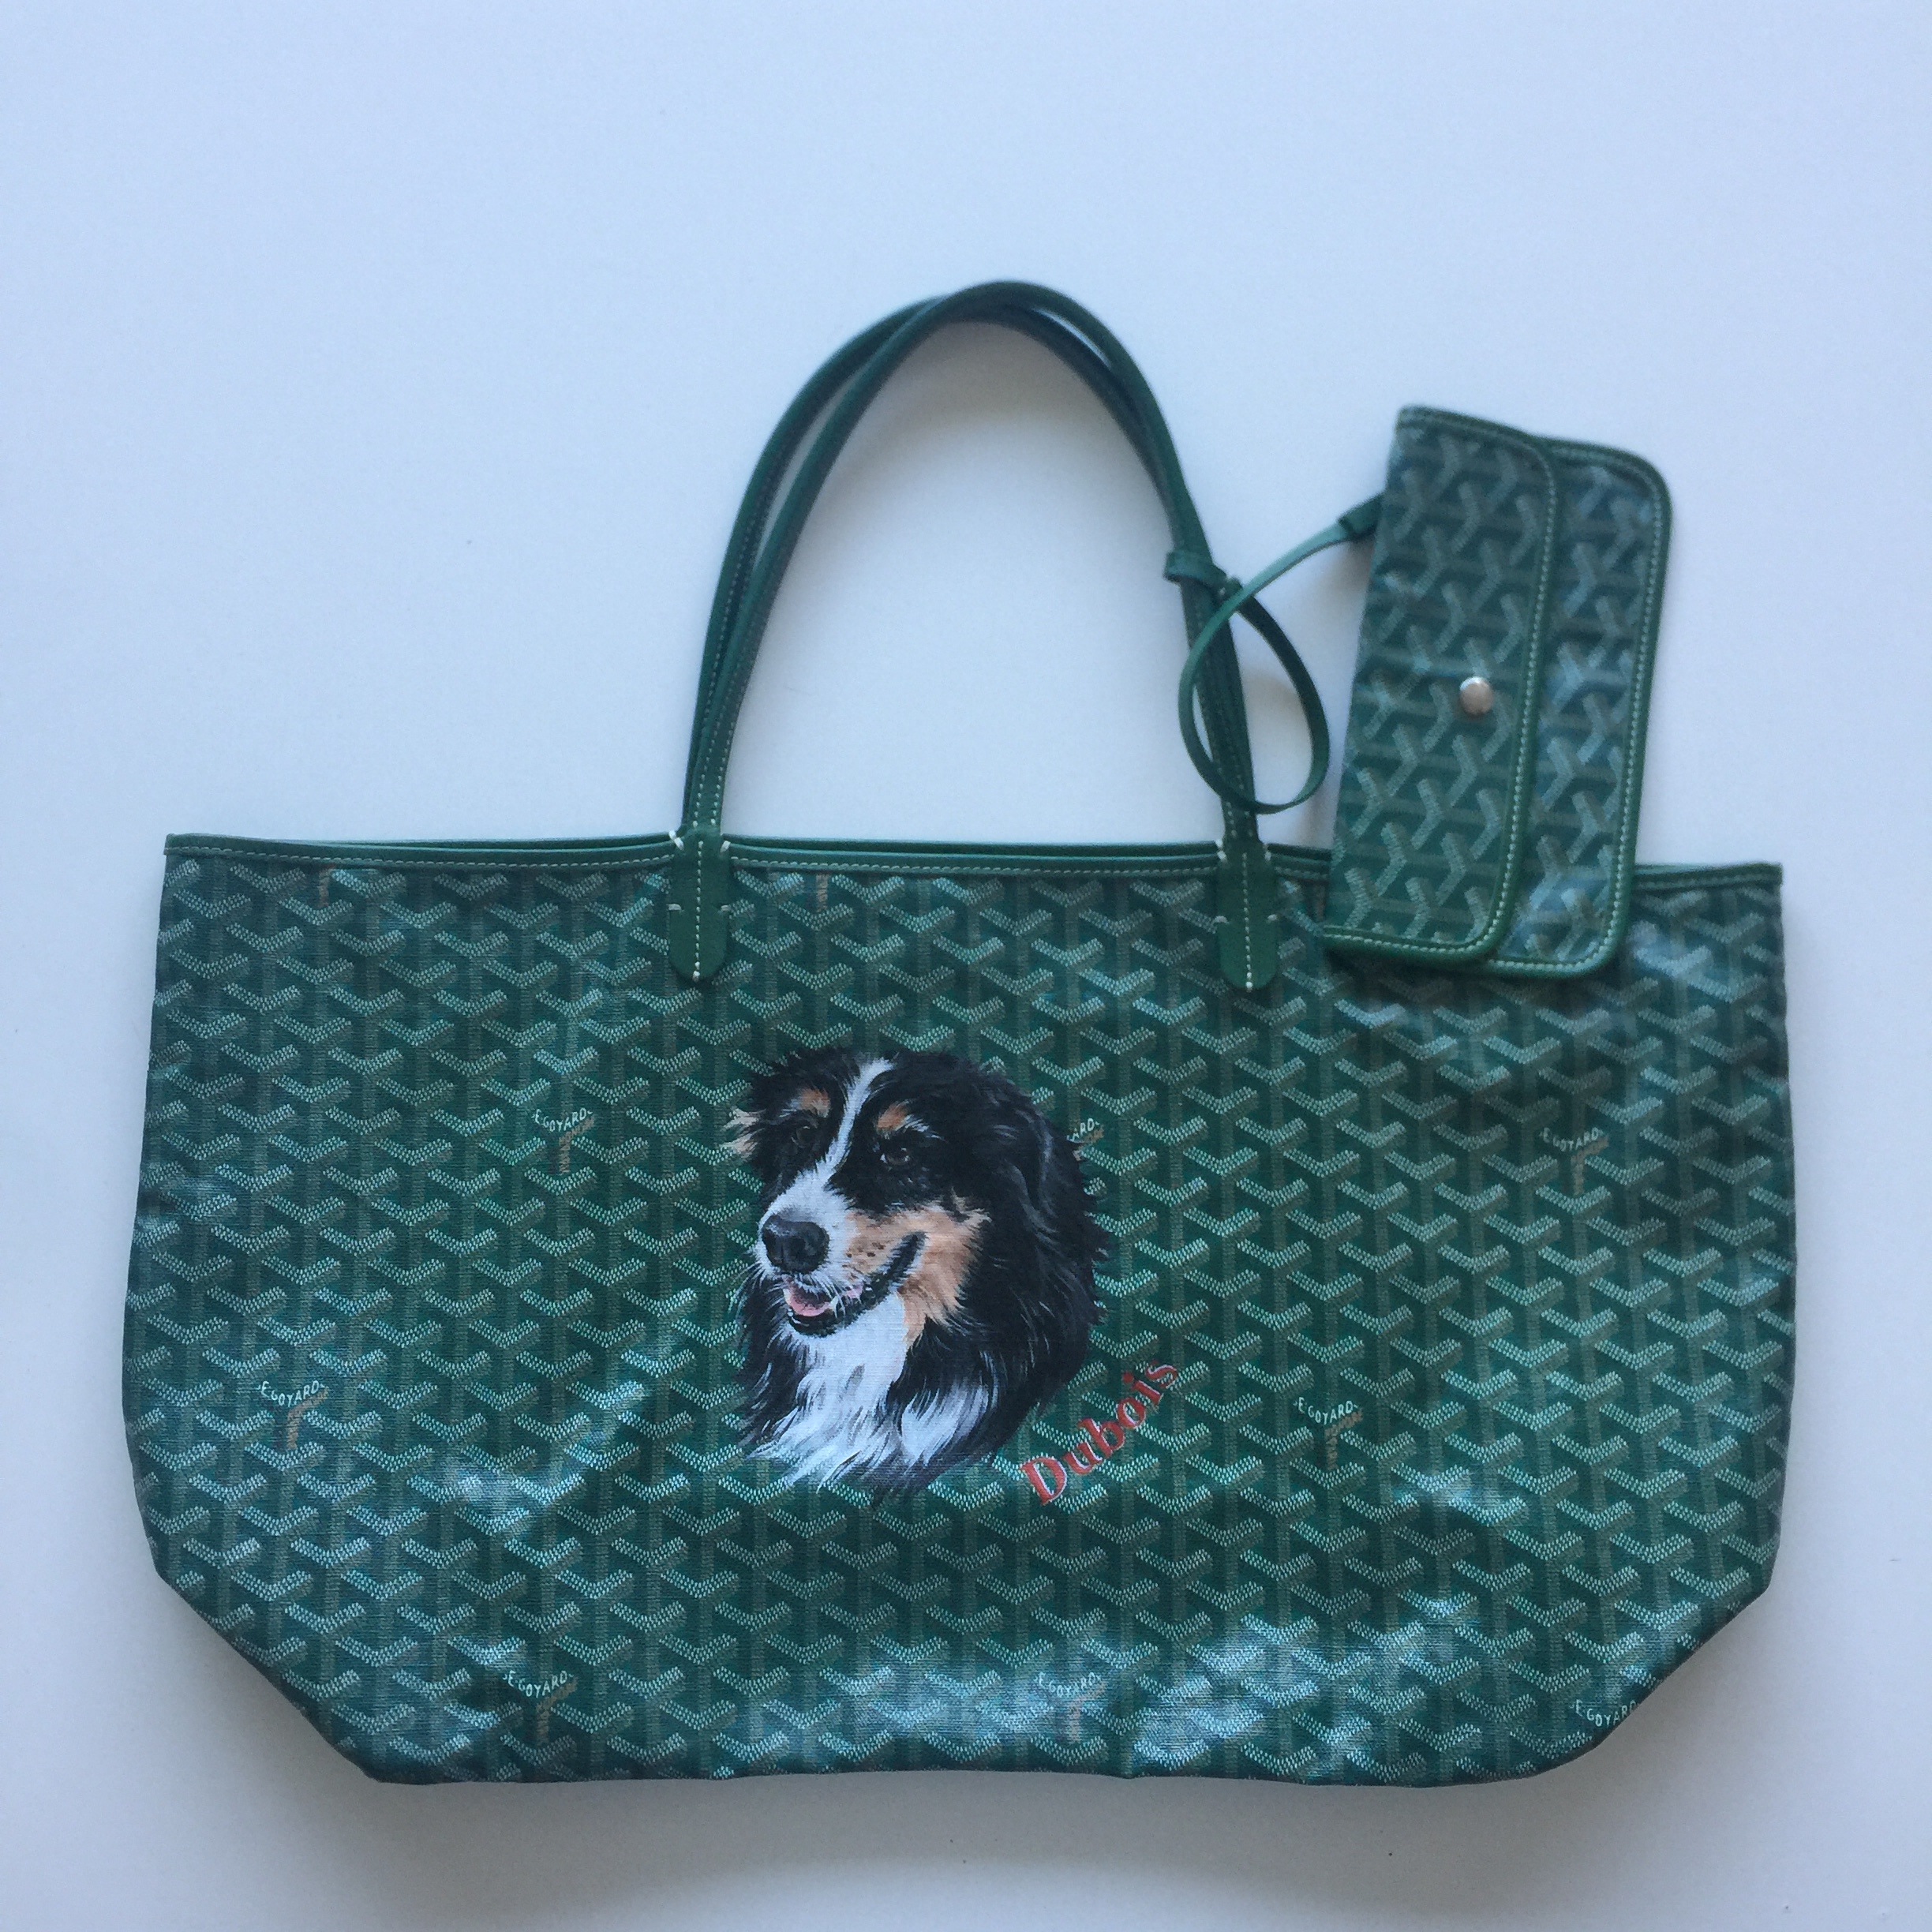 Dubois on a Goyard tote, commissioned by Matt for Hilary.